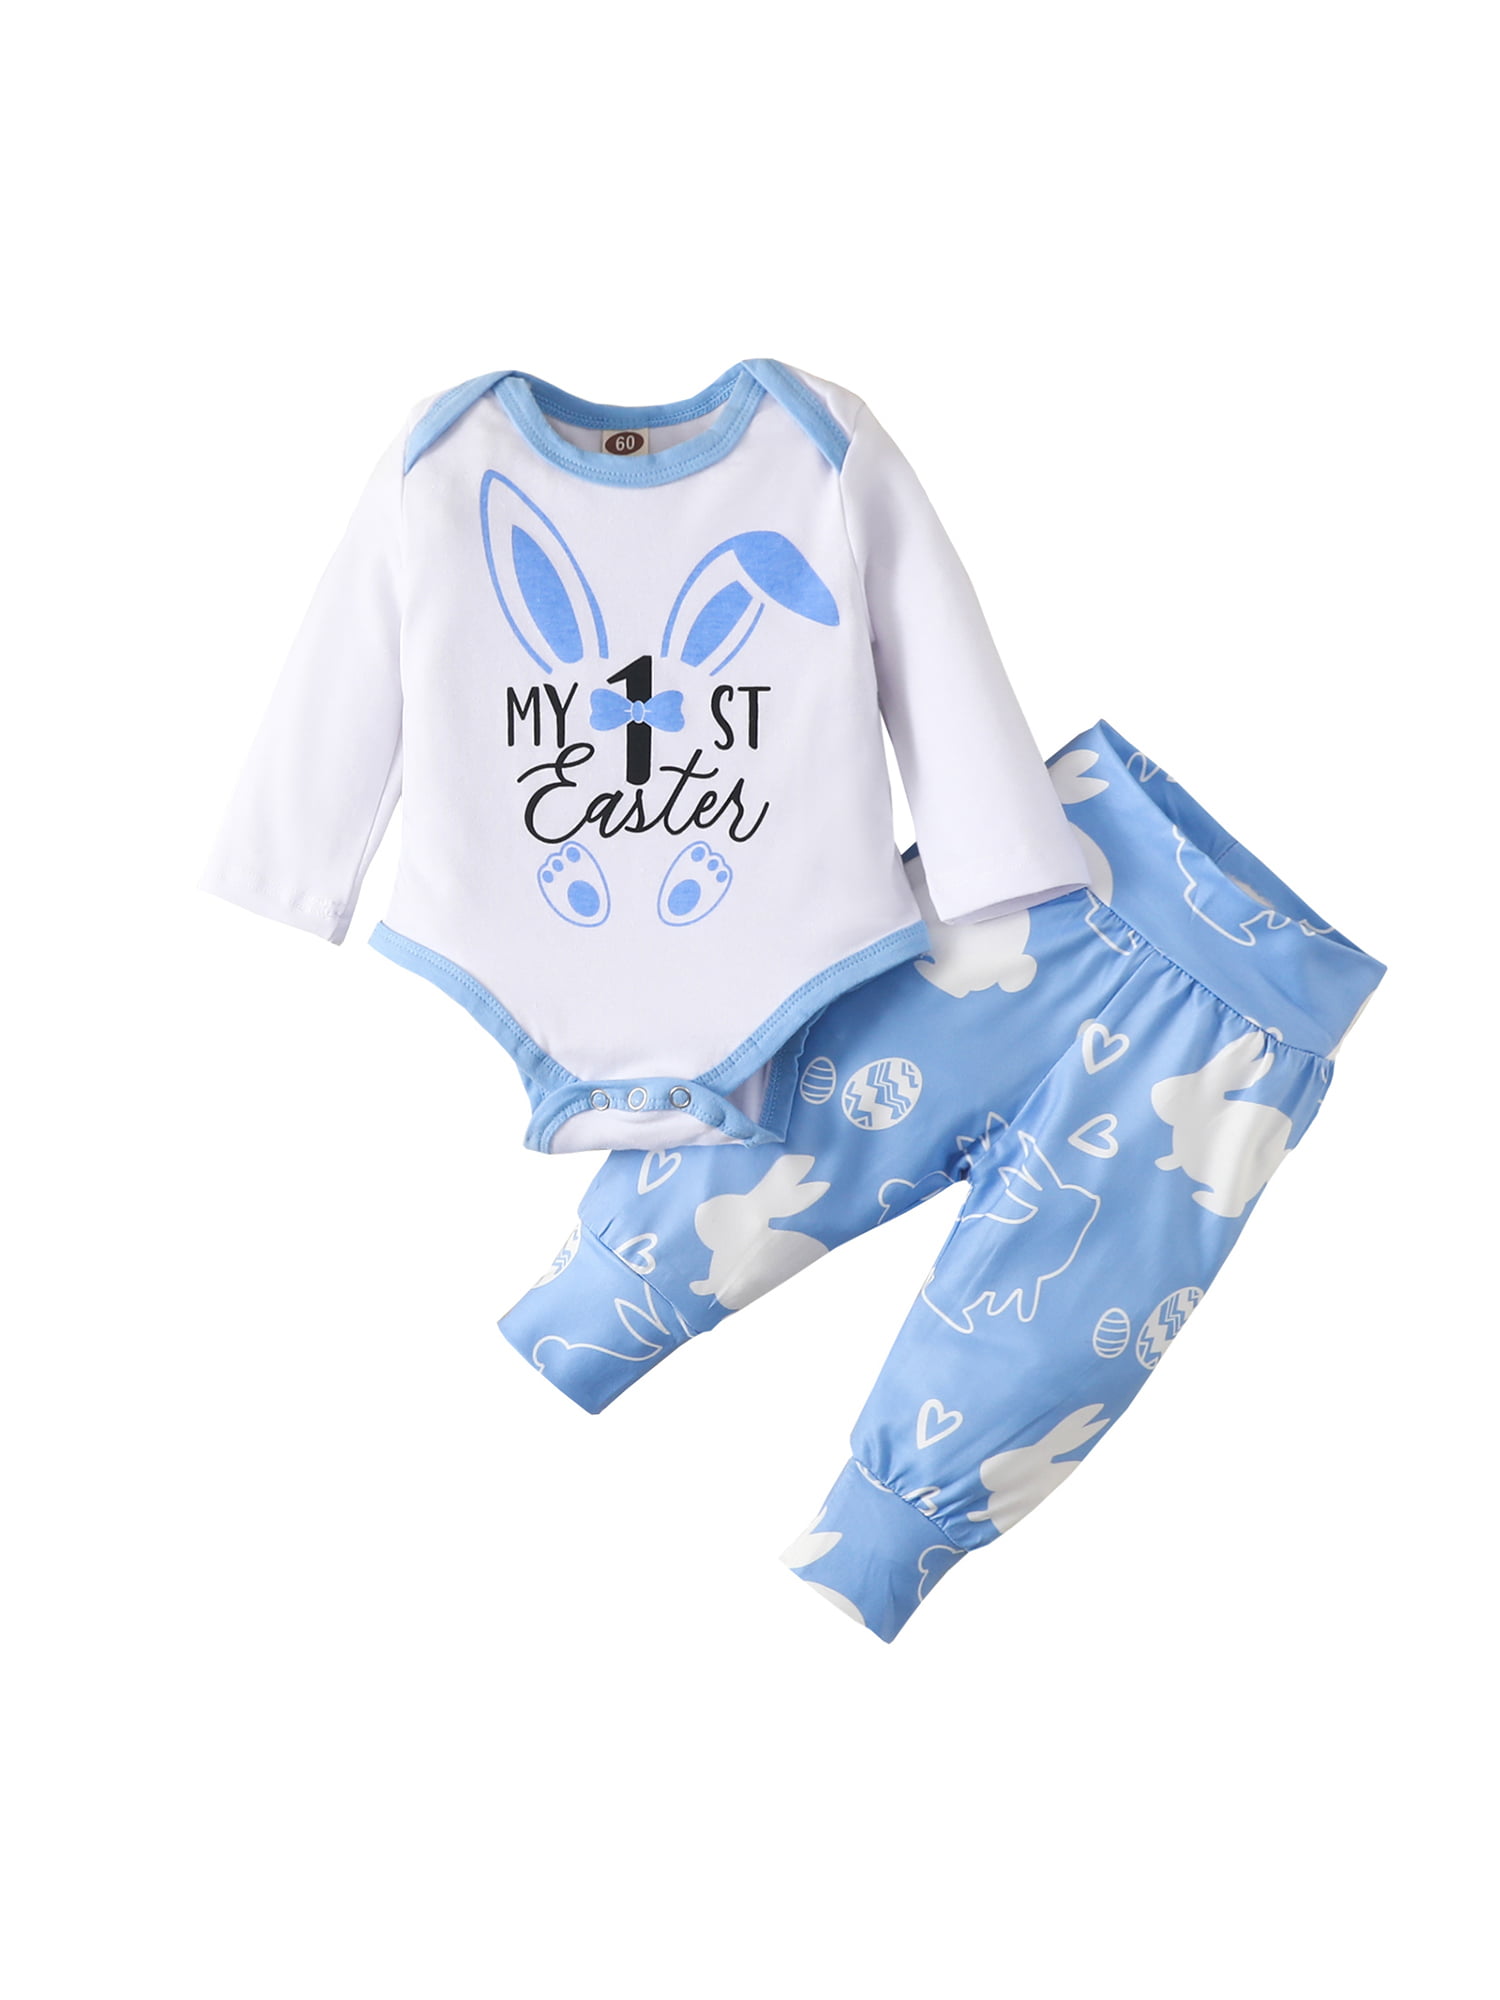 Toddler Baby Boys Easter Sets Infant Bunny Printed Newborn Outfit Spring Fall Winter 0-24M